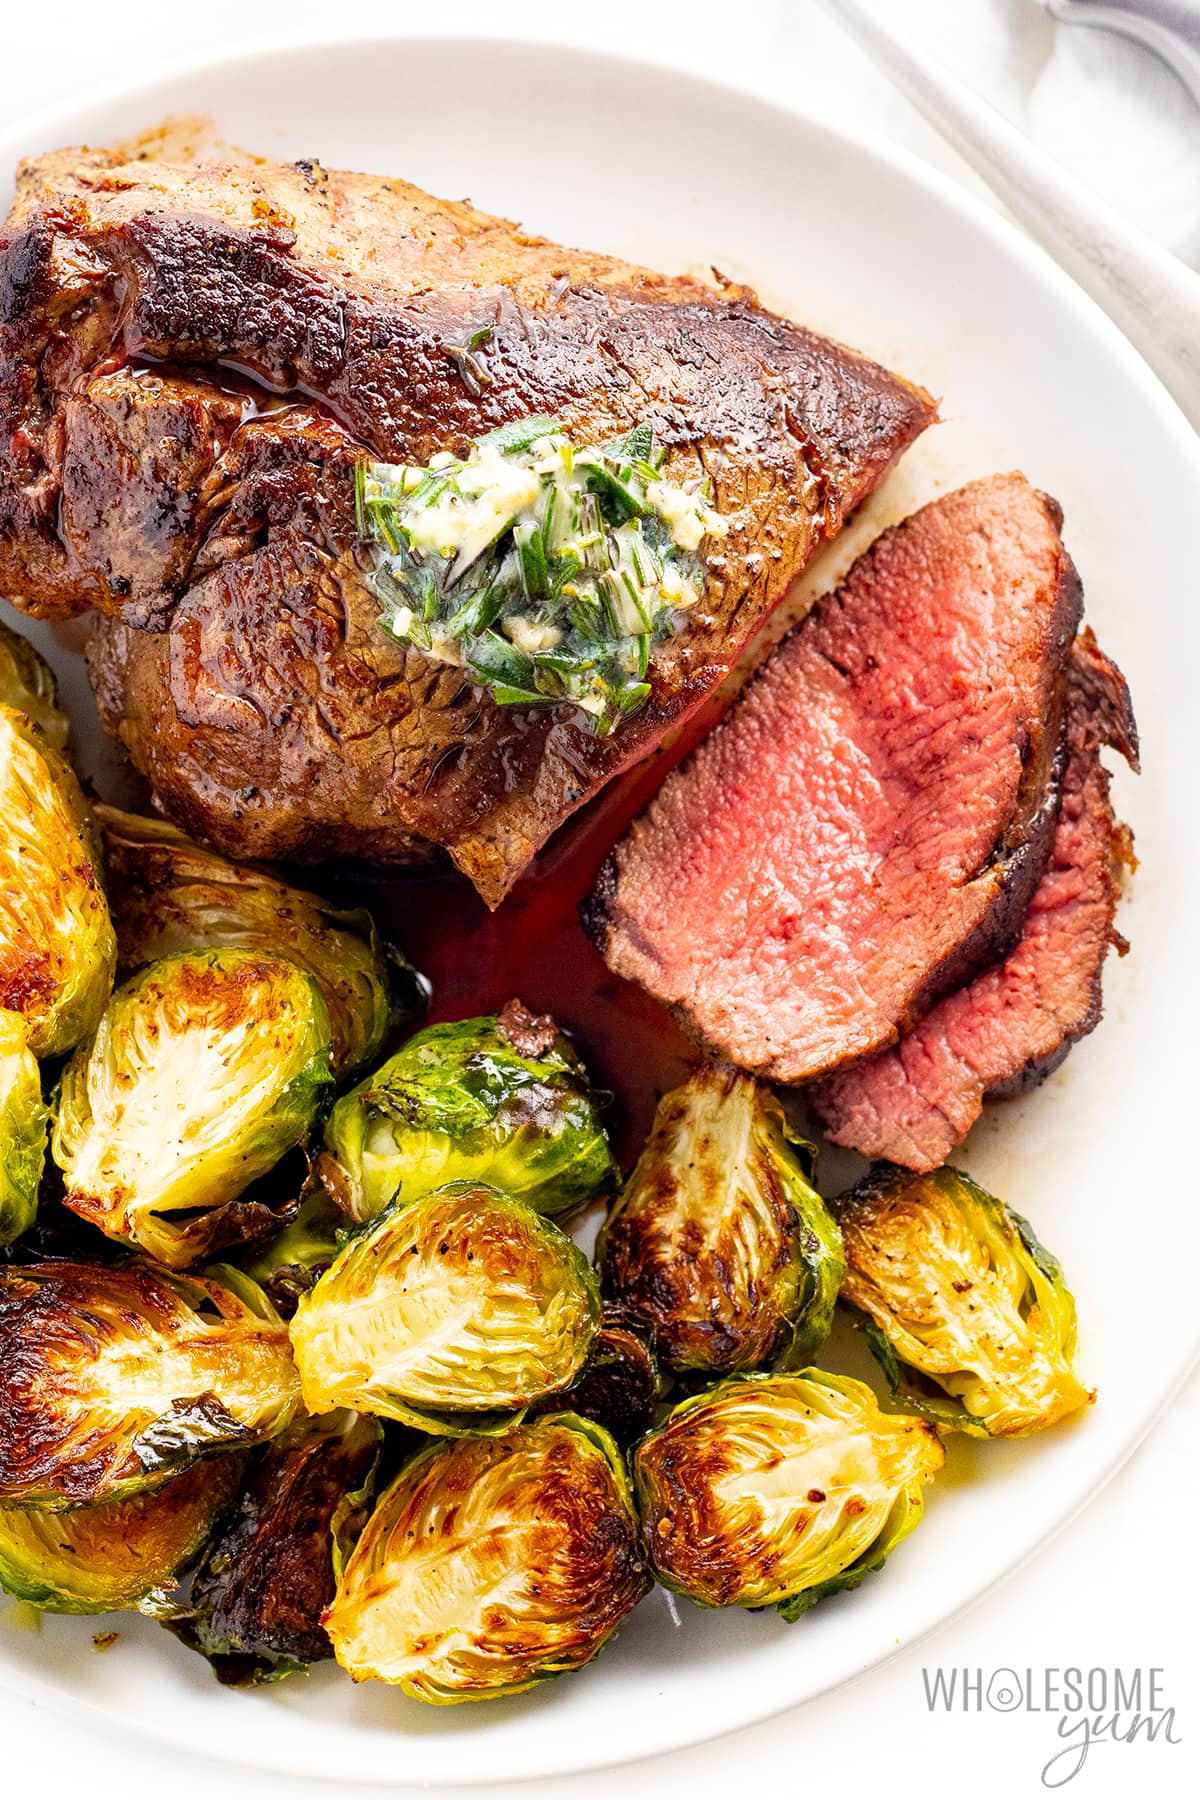 Learn the best way to cook filet mignon like this one shown with brussels sprouts.